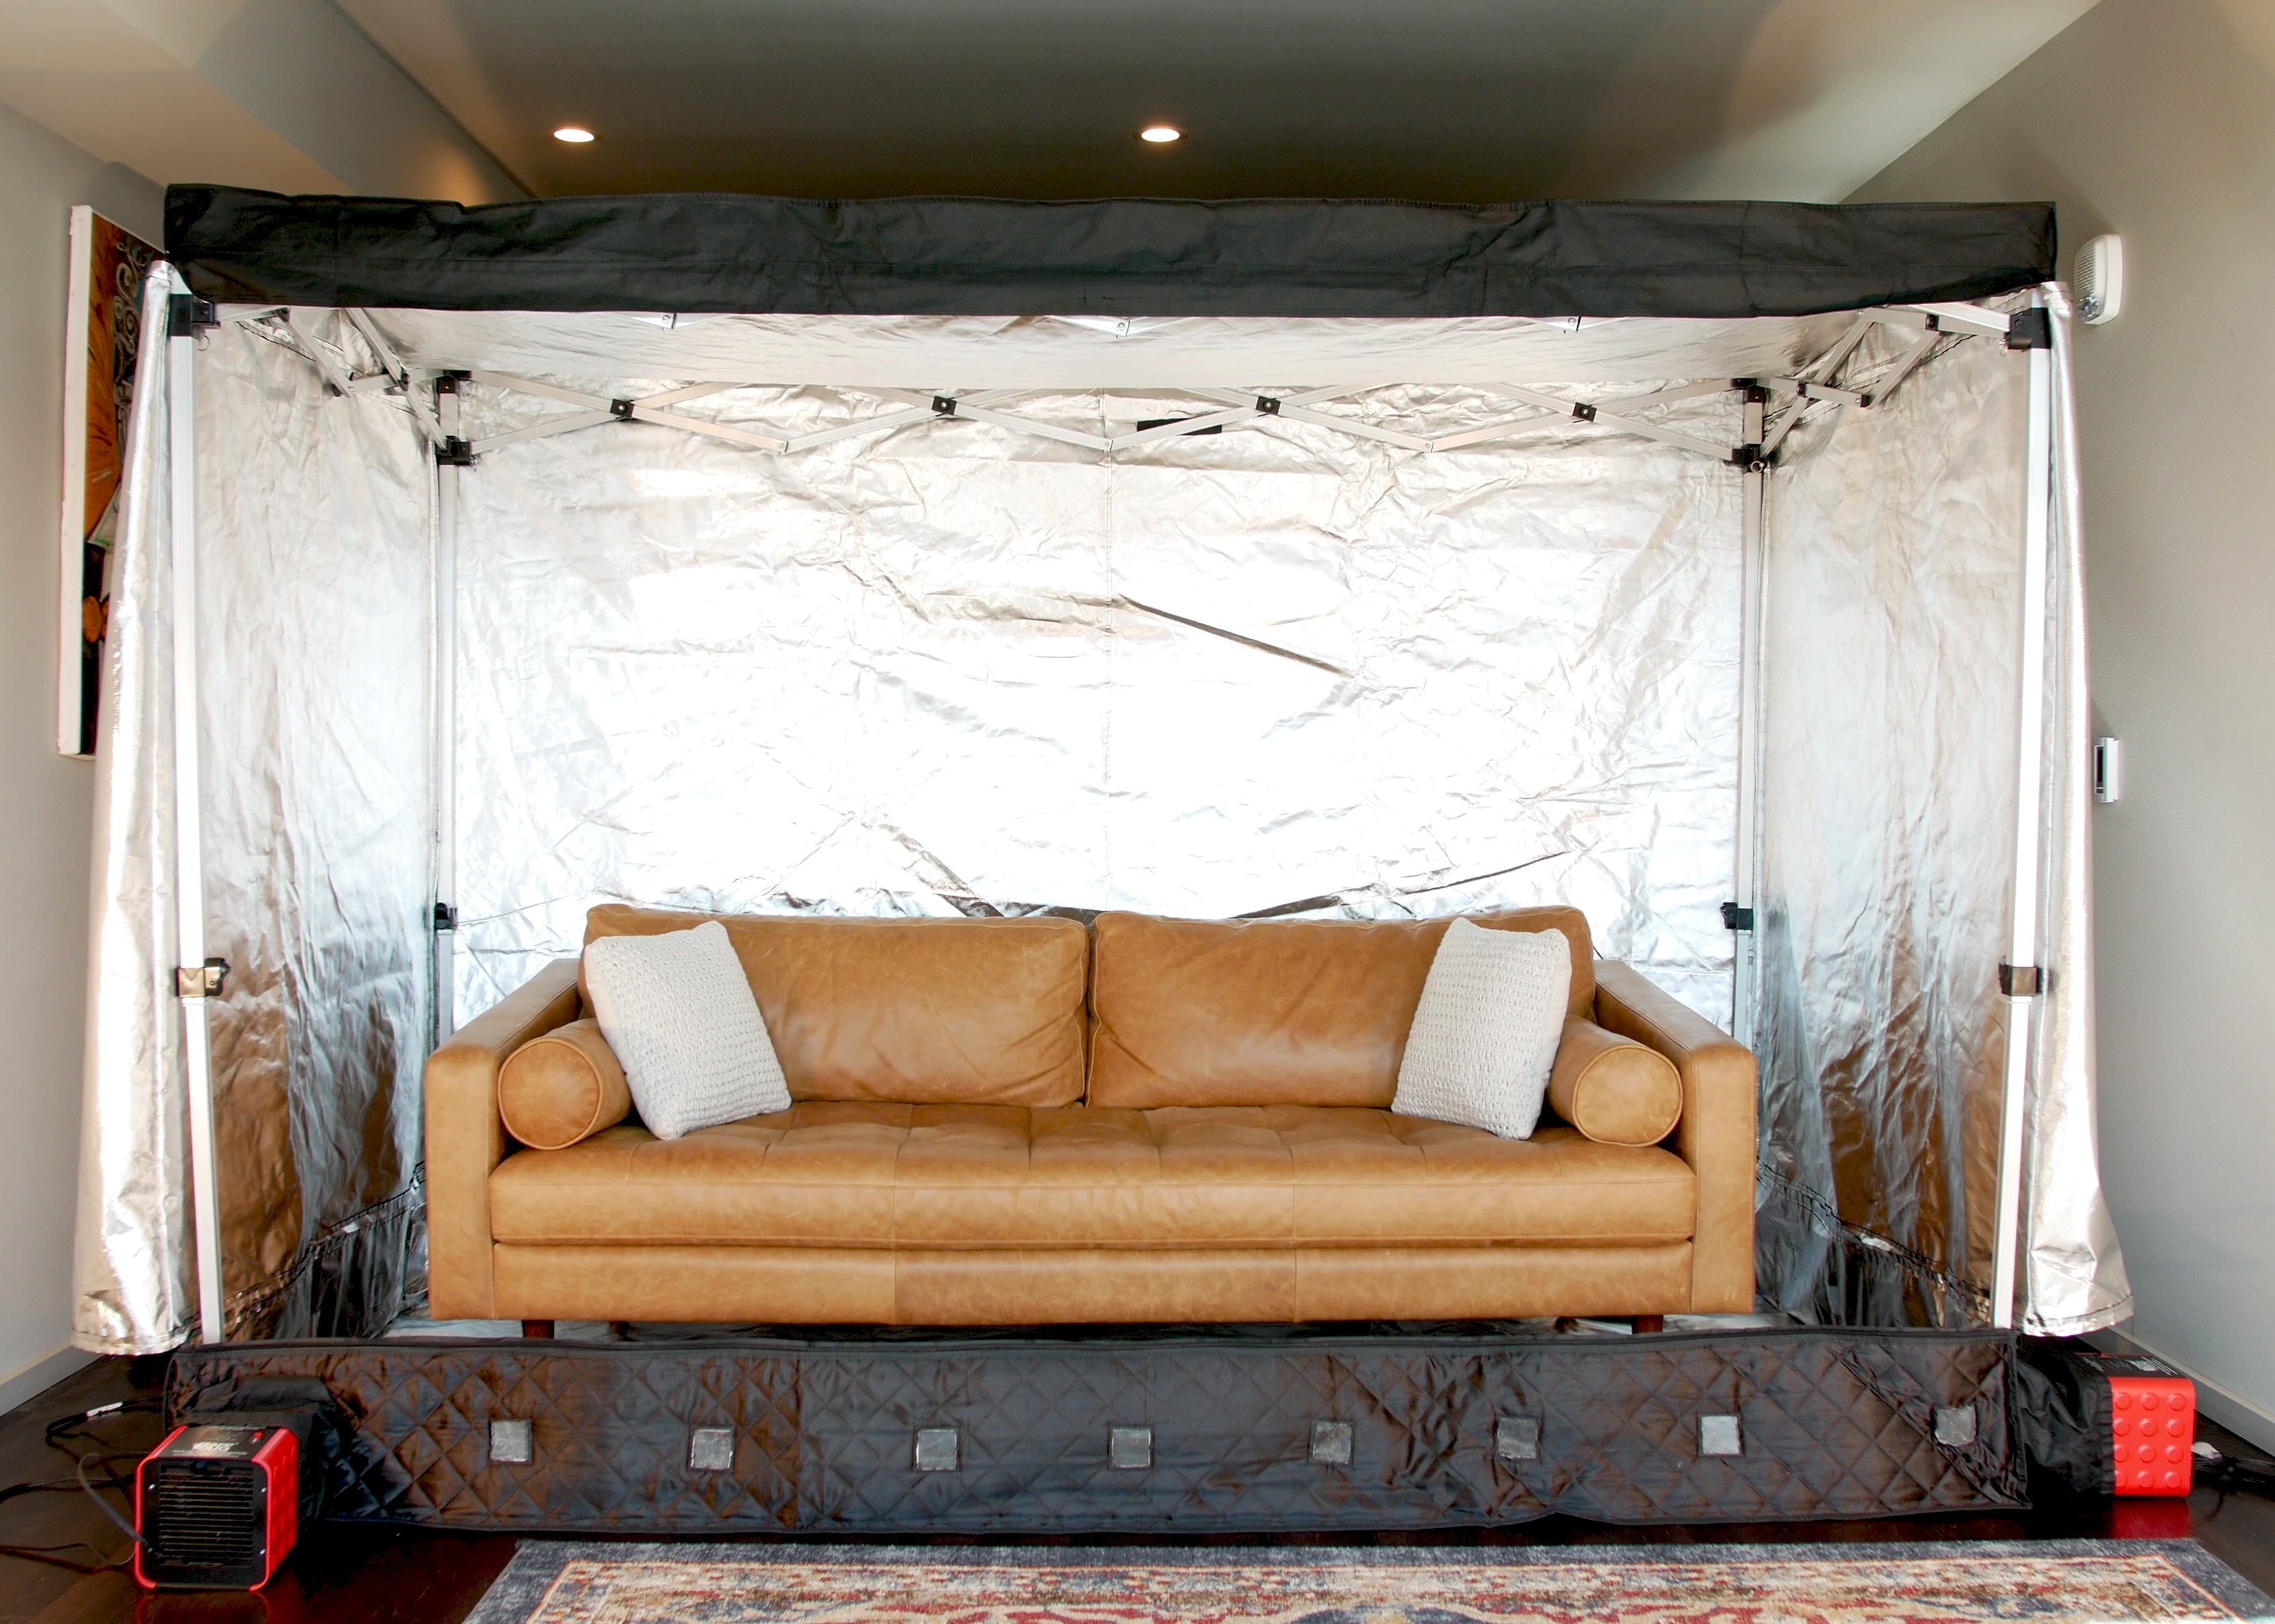 ZappBug Room in a living room half open displaying a cloth couch being treated